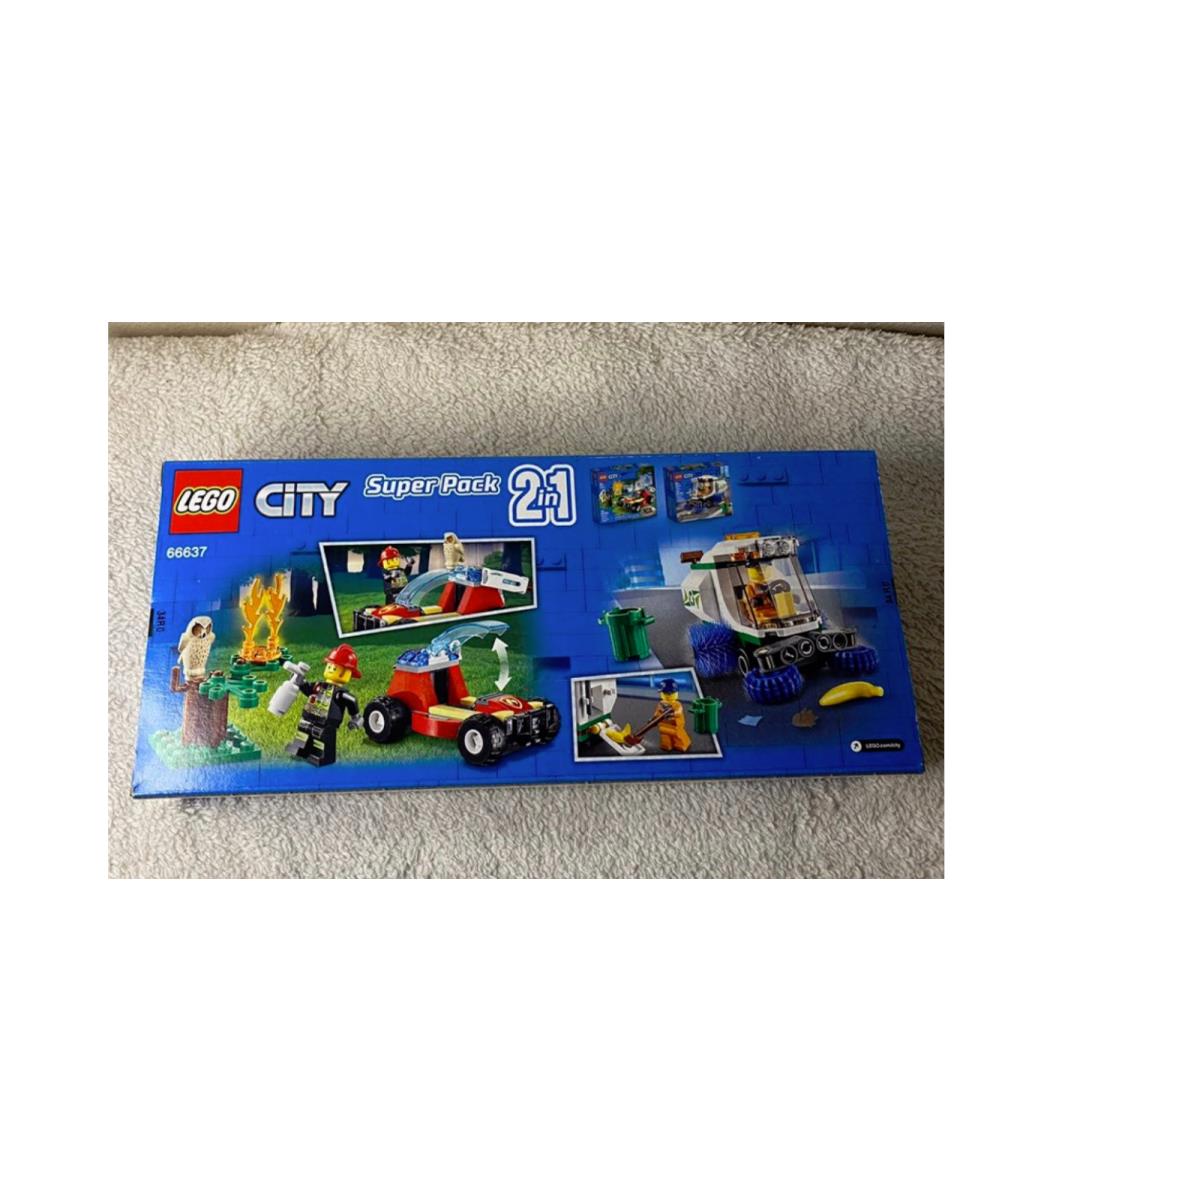 Lego City Super Pack 2-in-1 66637 Buiding Toy For Kids Truck Plane 173 Pieces